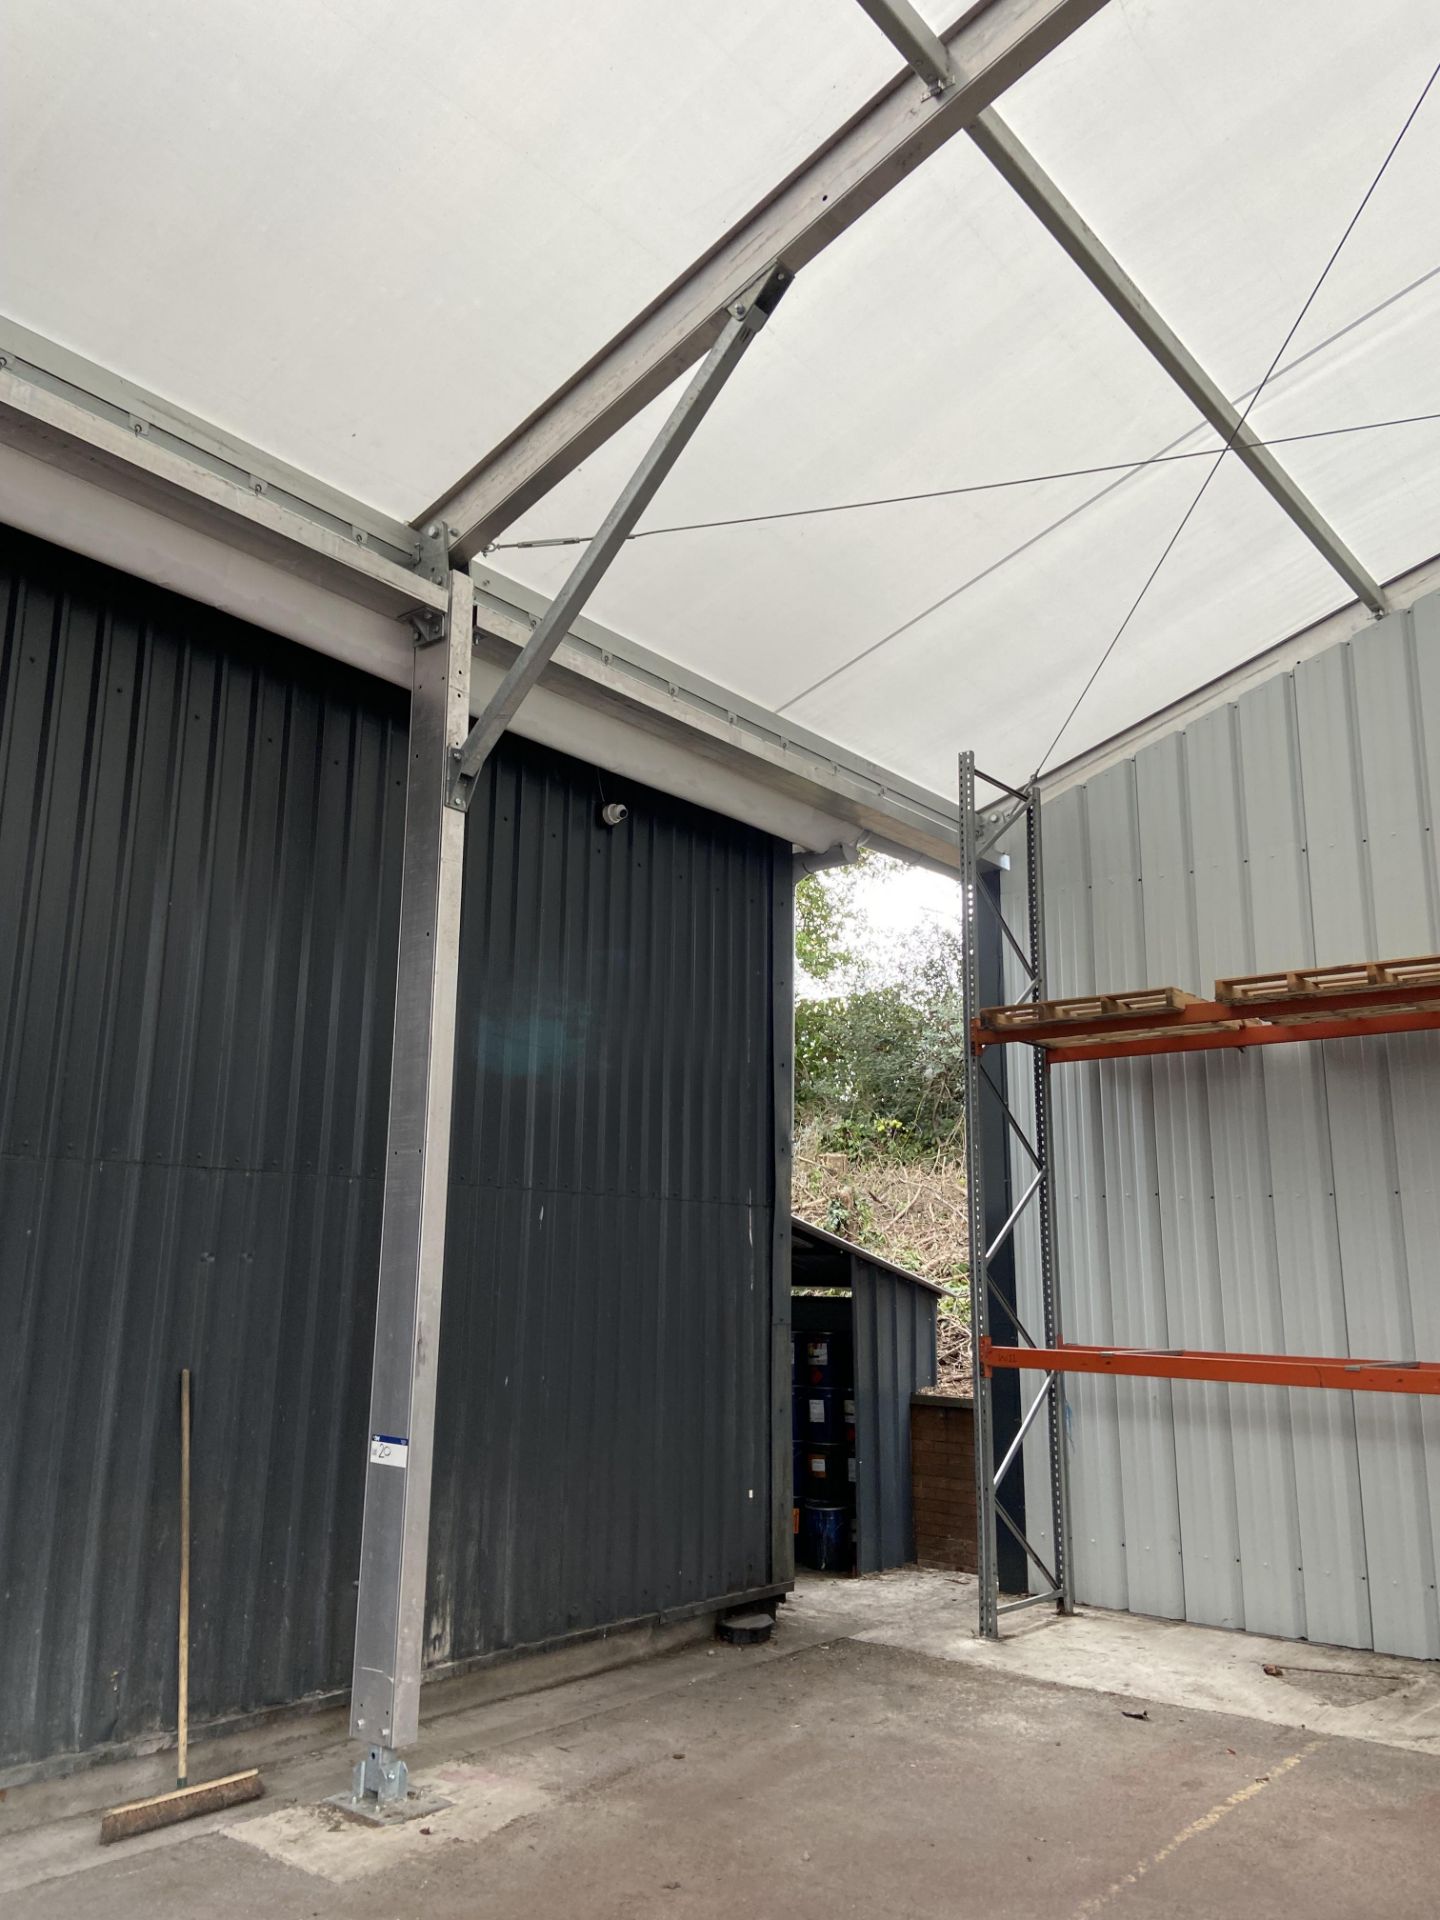 ALLOY PORTAL FRAMED TEMPORARY INDUSTRIAL BUILDING, approx. 14.7m x 9.8m x 4.8m high (eaves), 7.3m to - Image 5 of 9